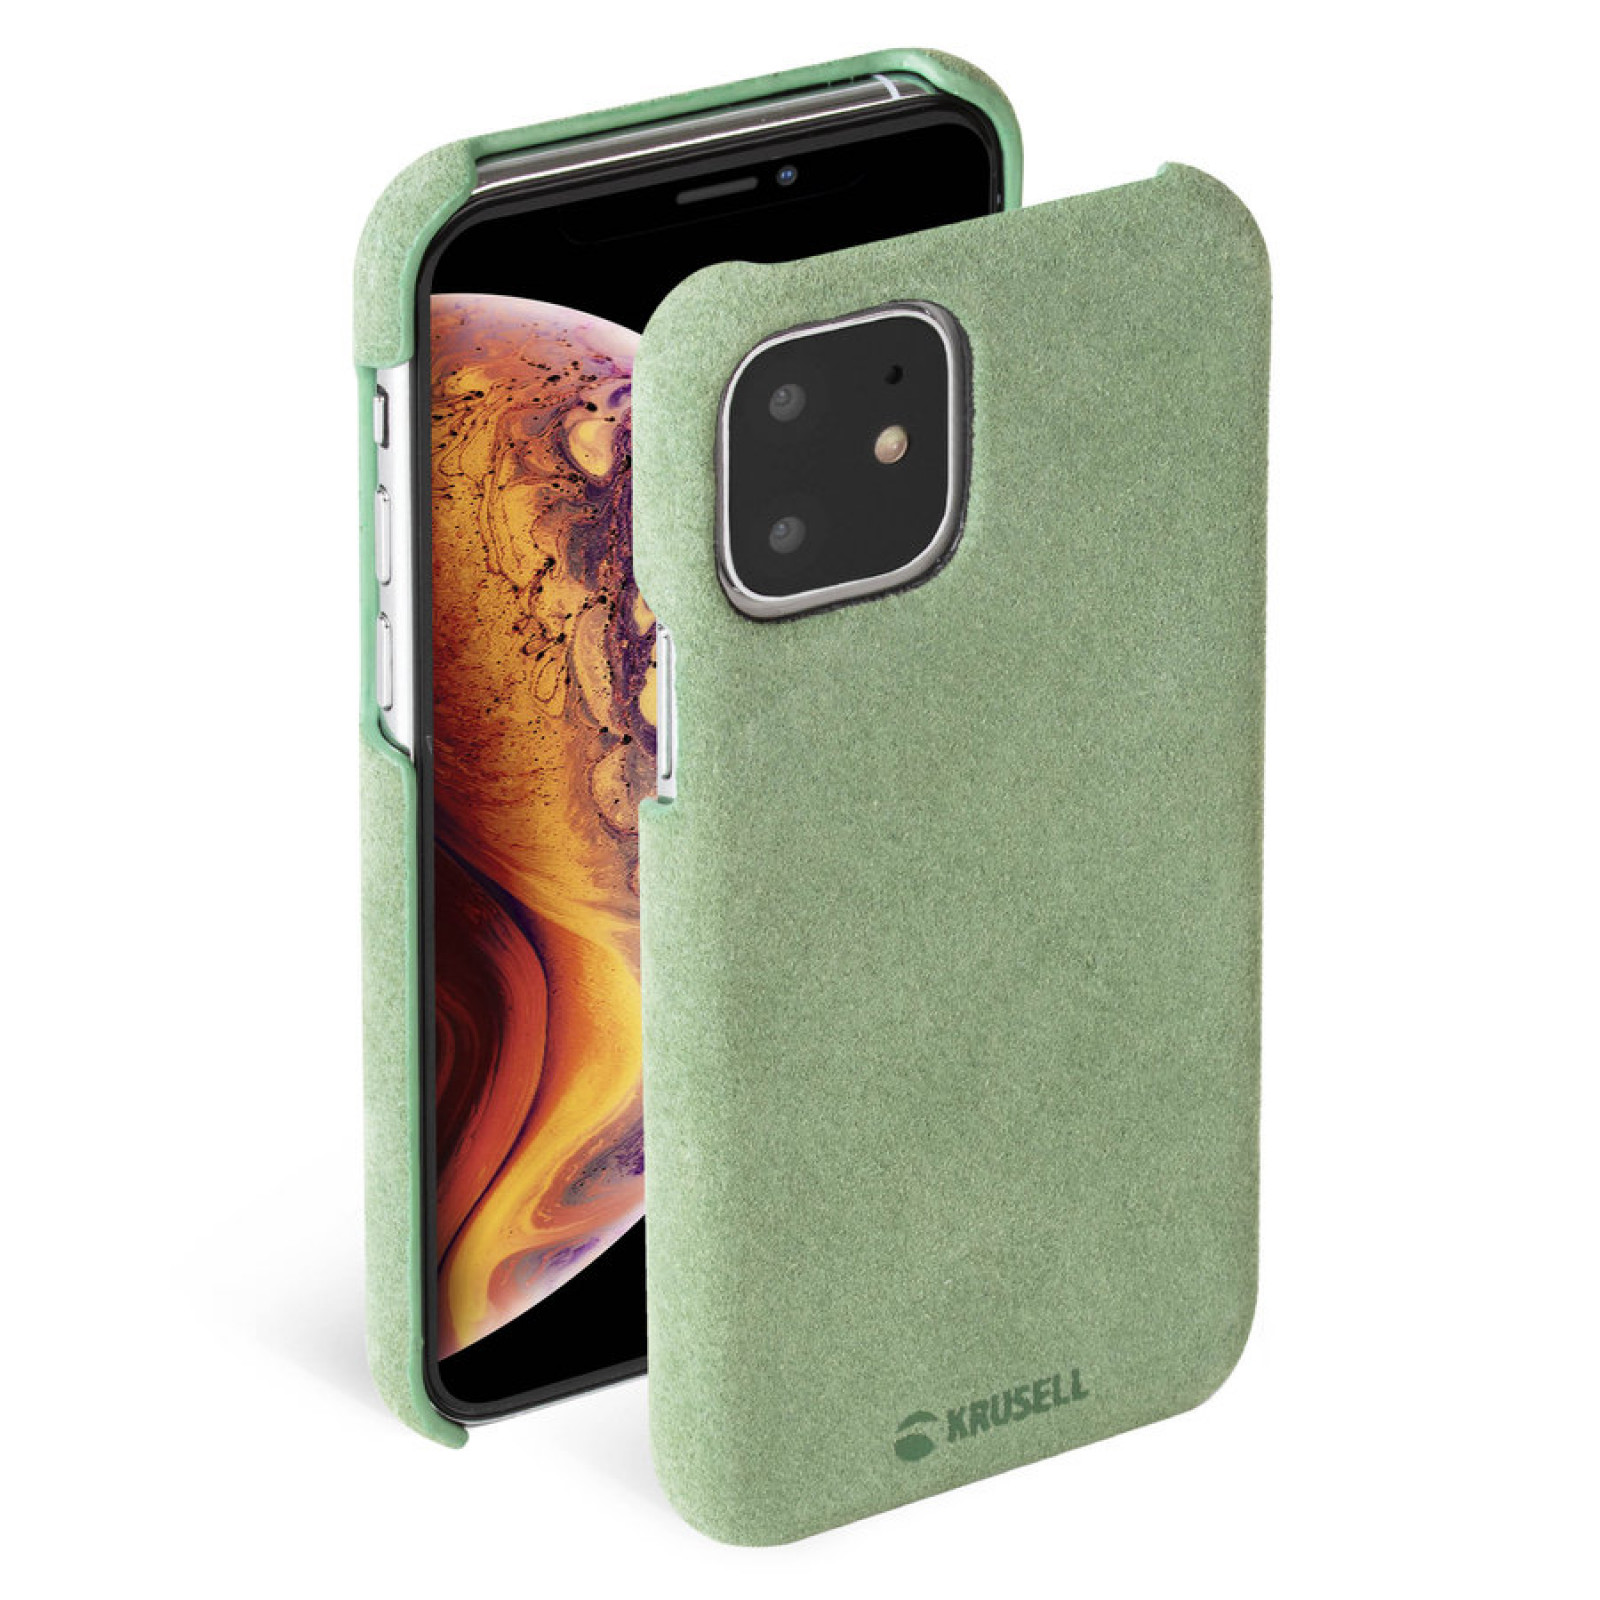 Гръб Krusell Broby Cover естествен велур за Iphone 11 Olive